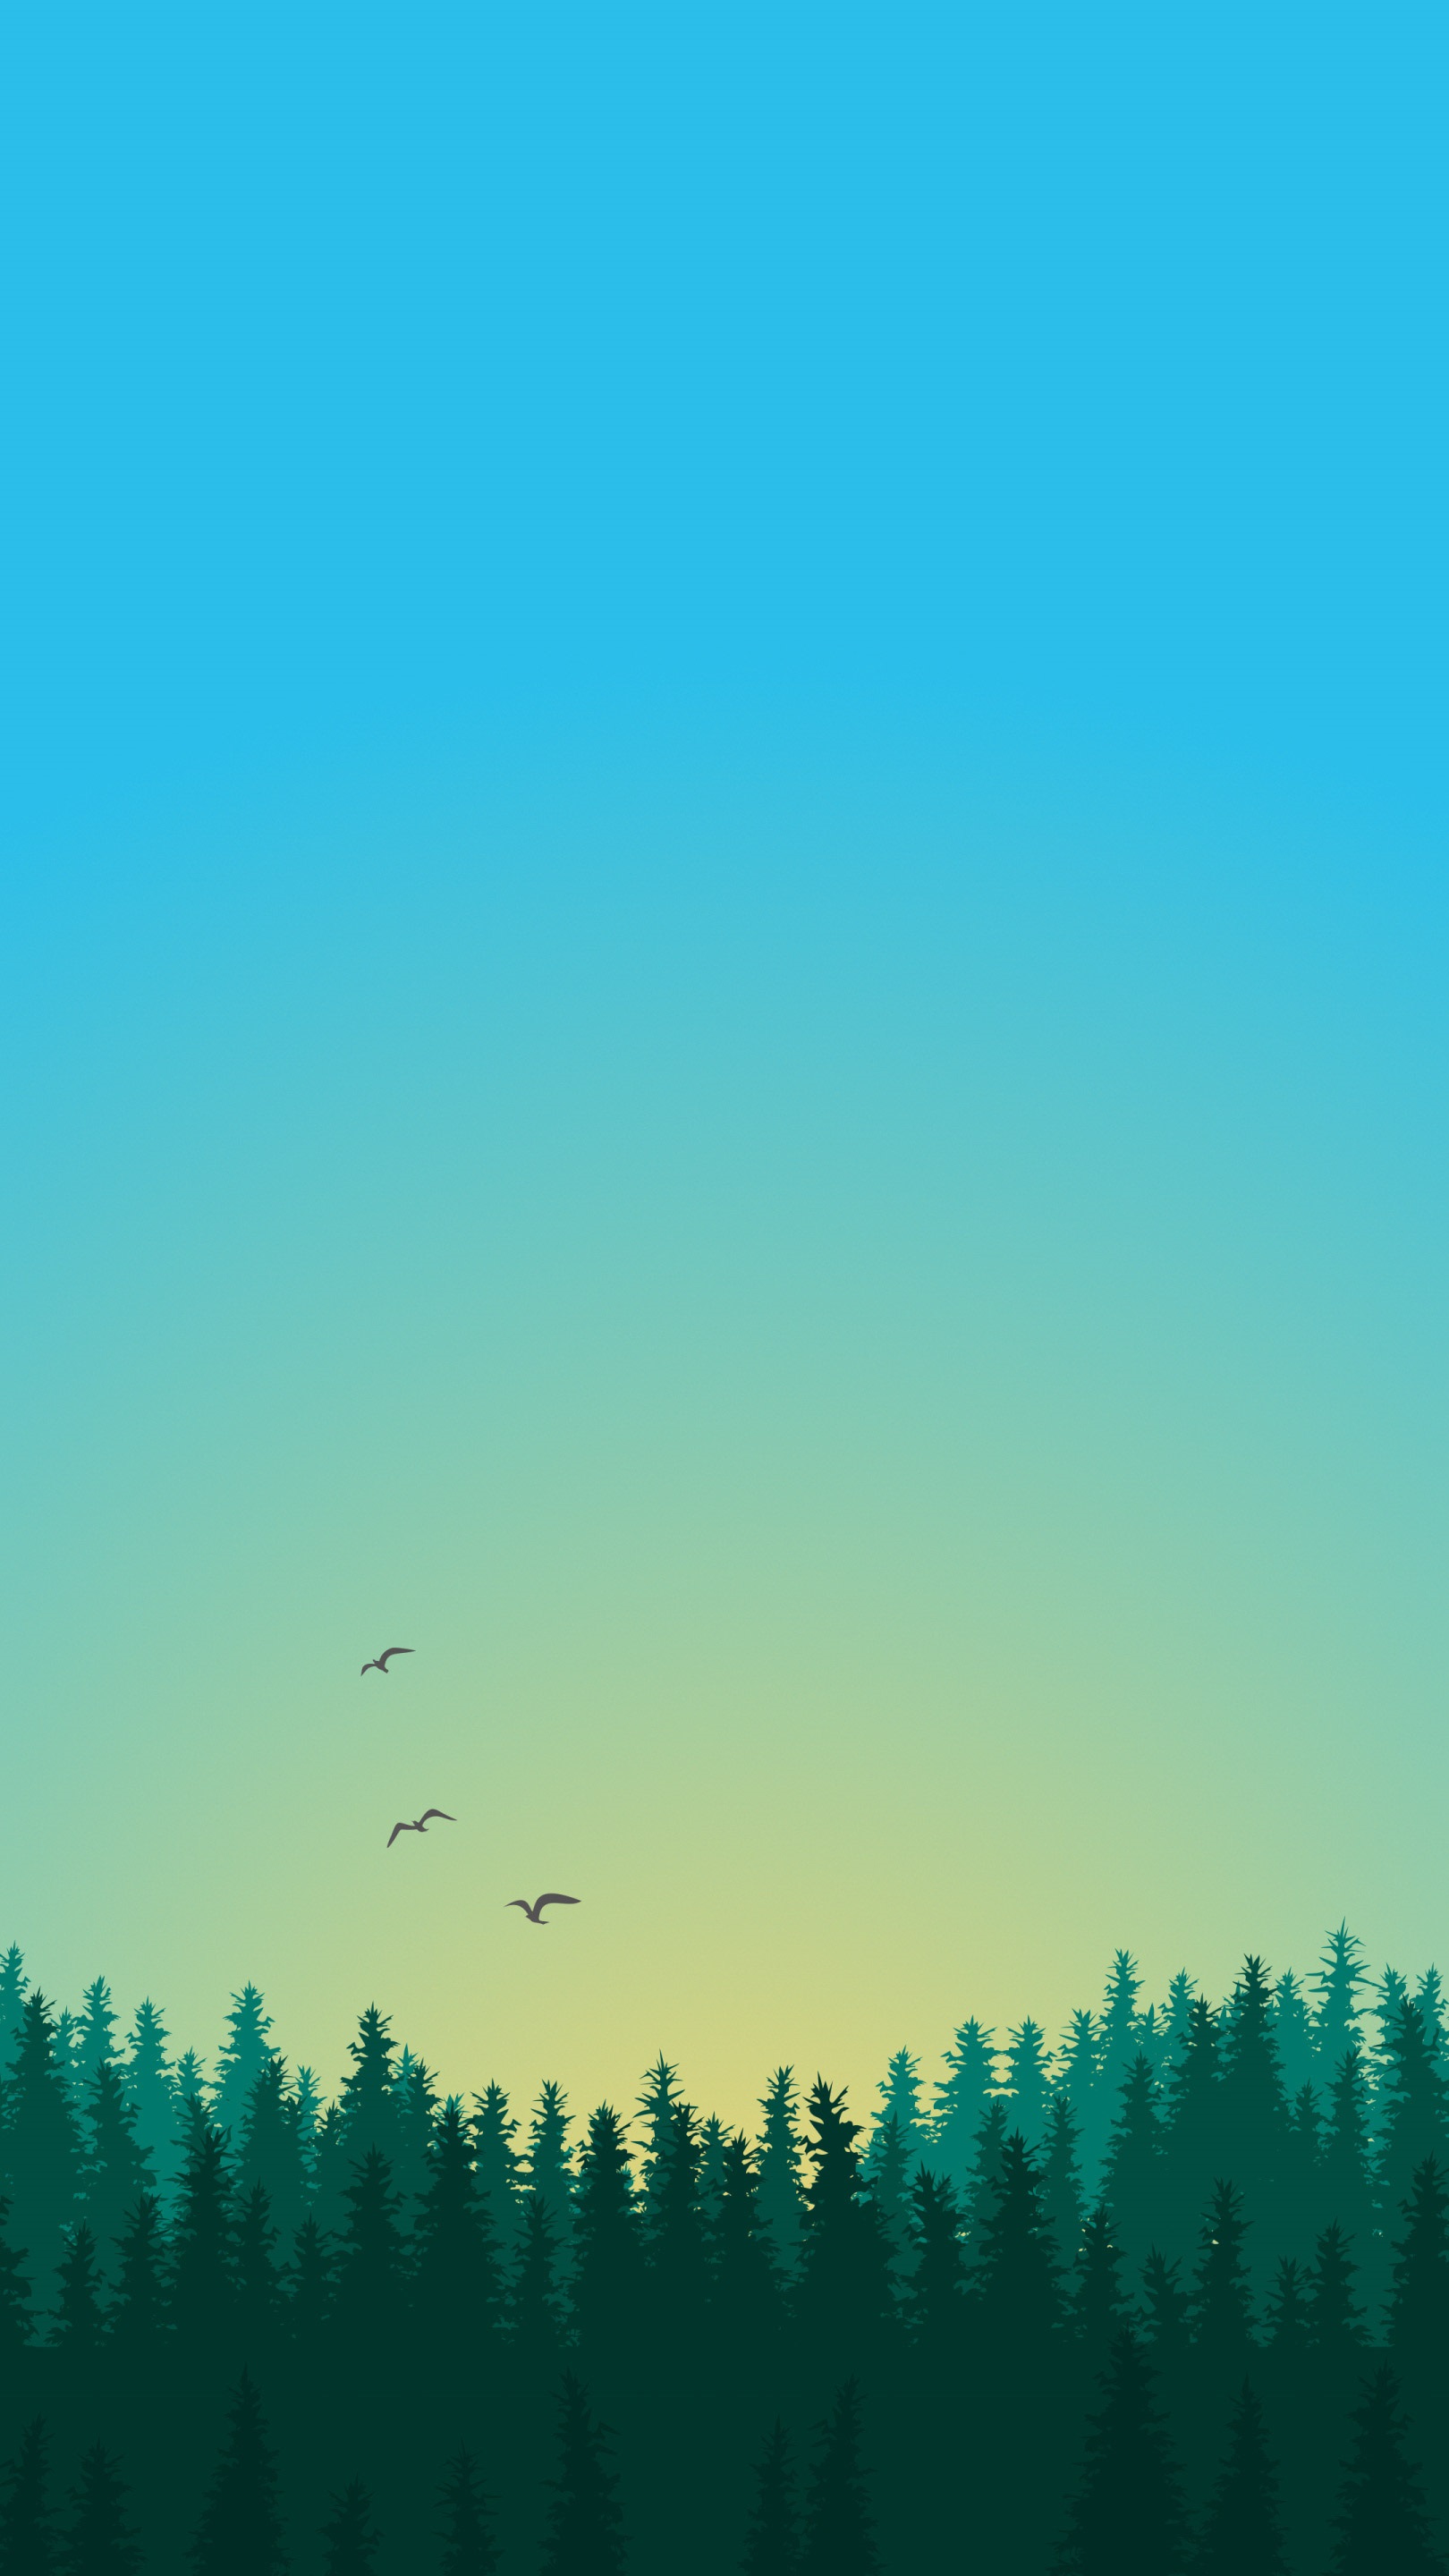 Download 34 Minimalist Wallpapers in QHD Quality | DroidViews